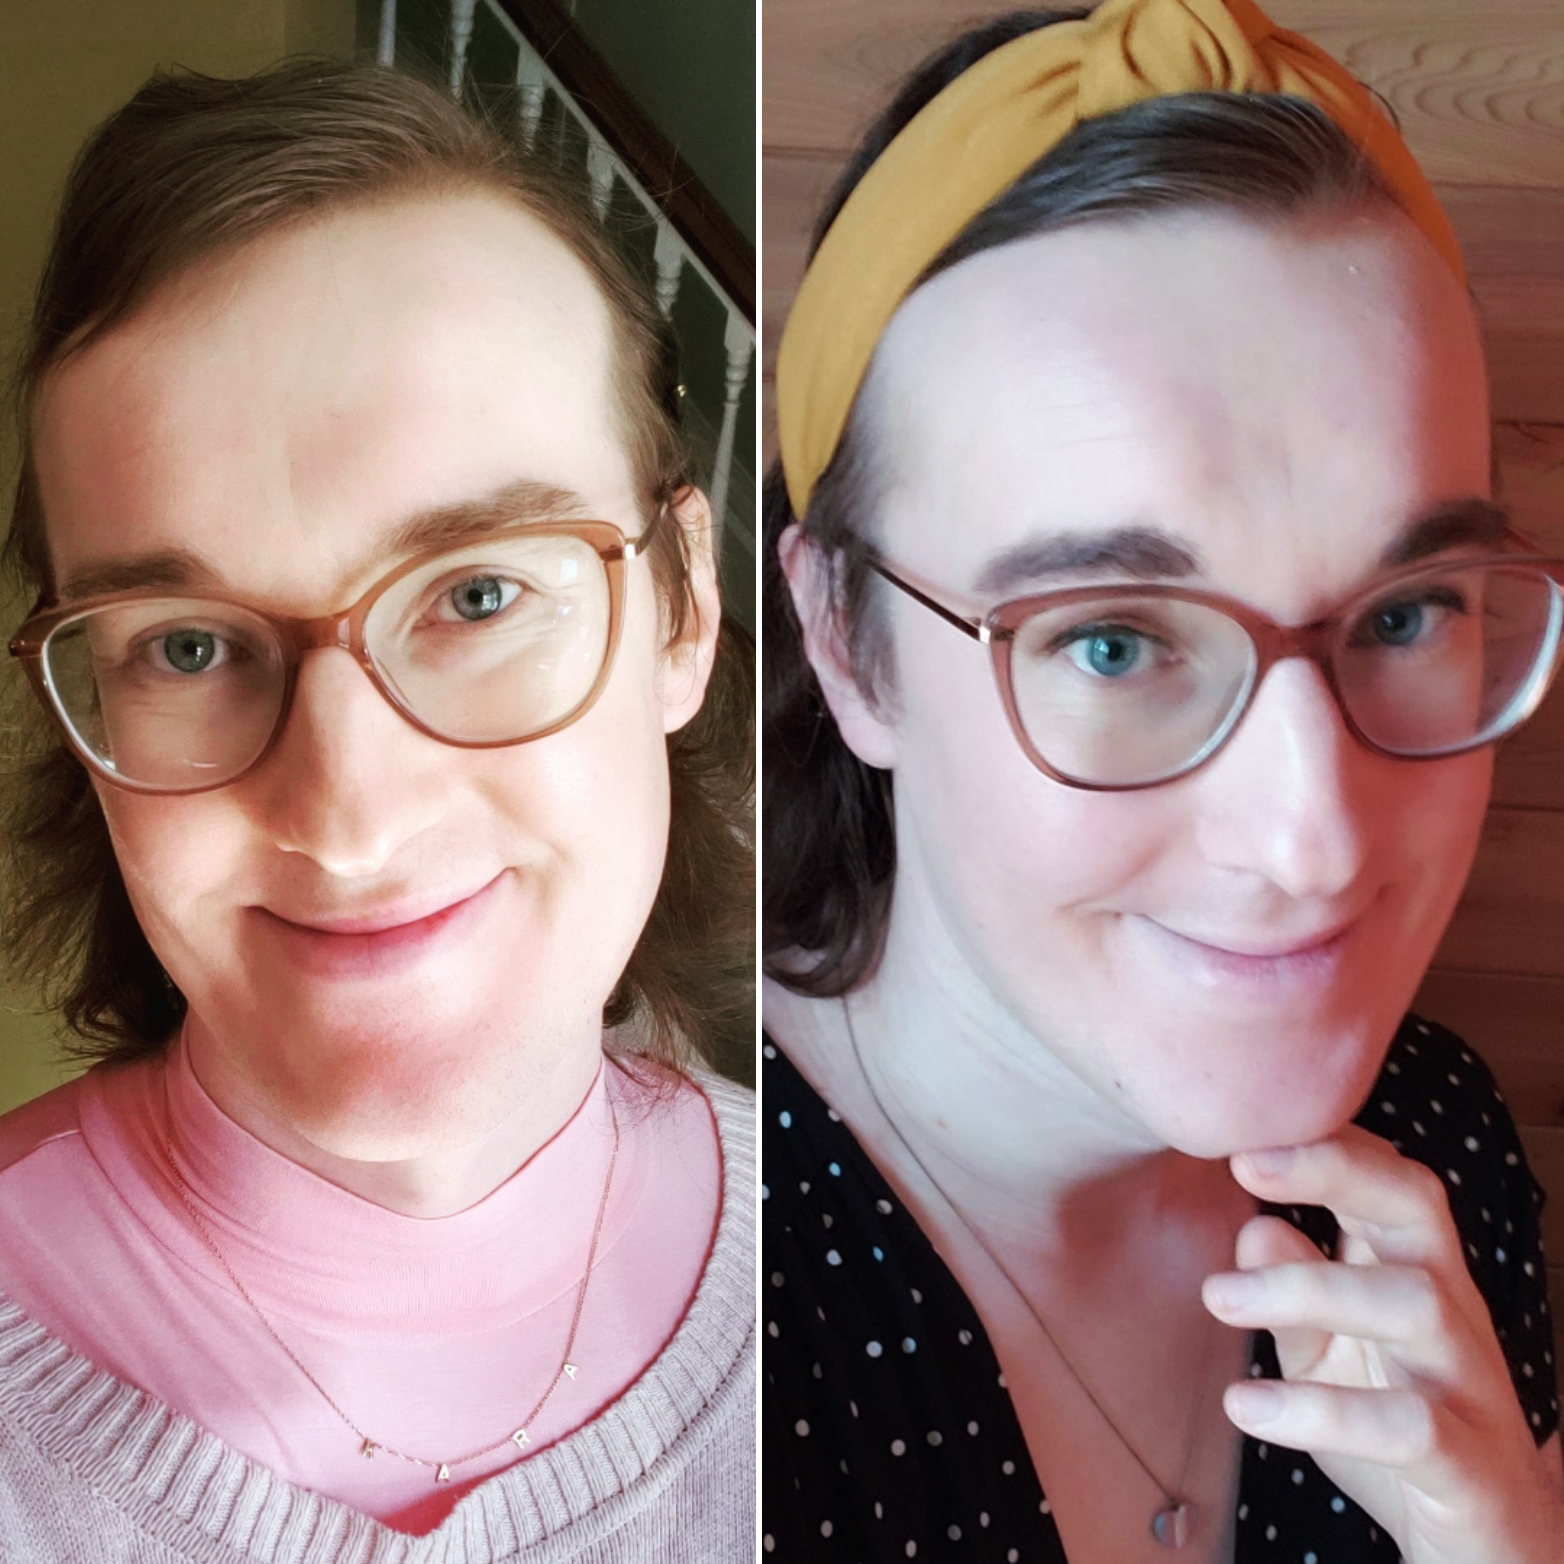 Composite photo. On the left, a selfie of me with no makeup, in a pink top. On the right, a selfie of me in a mustard headband and black dress with white polka dots and some eye makeup.